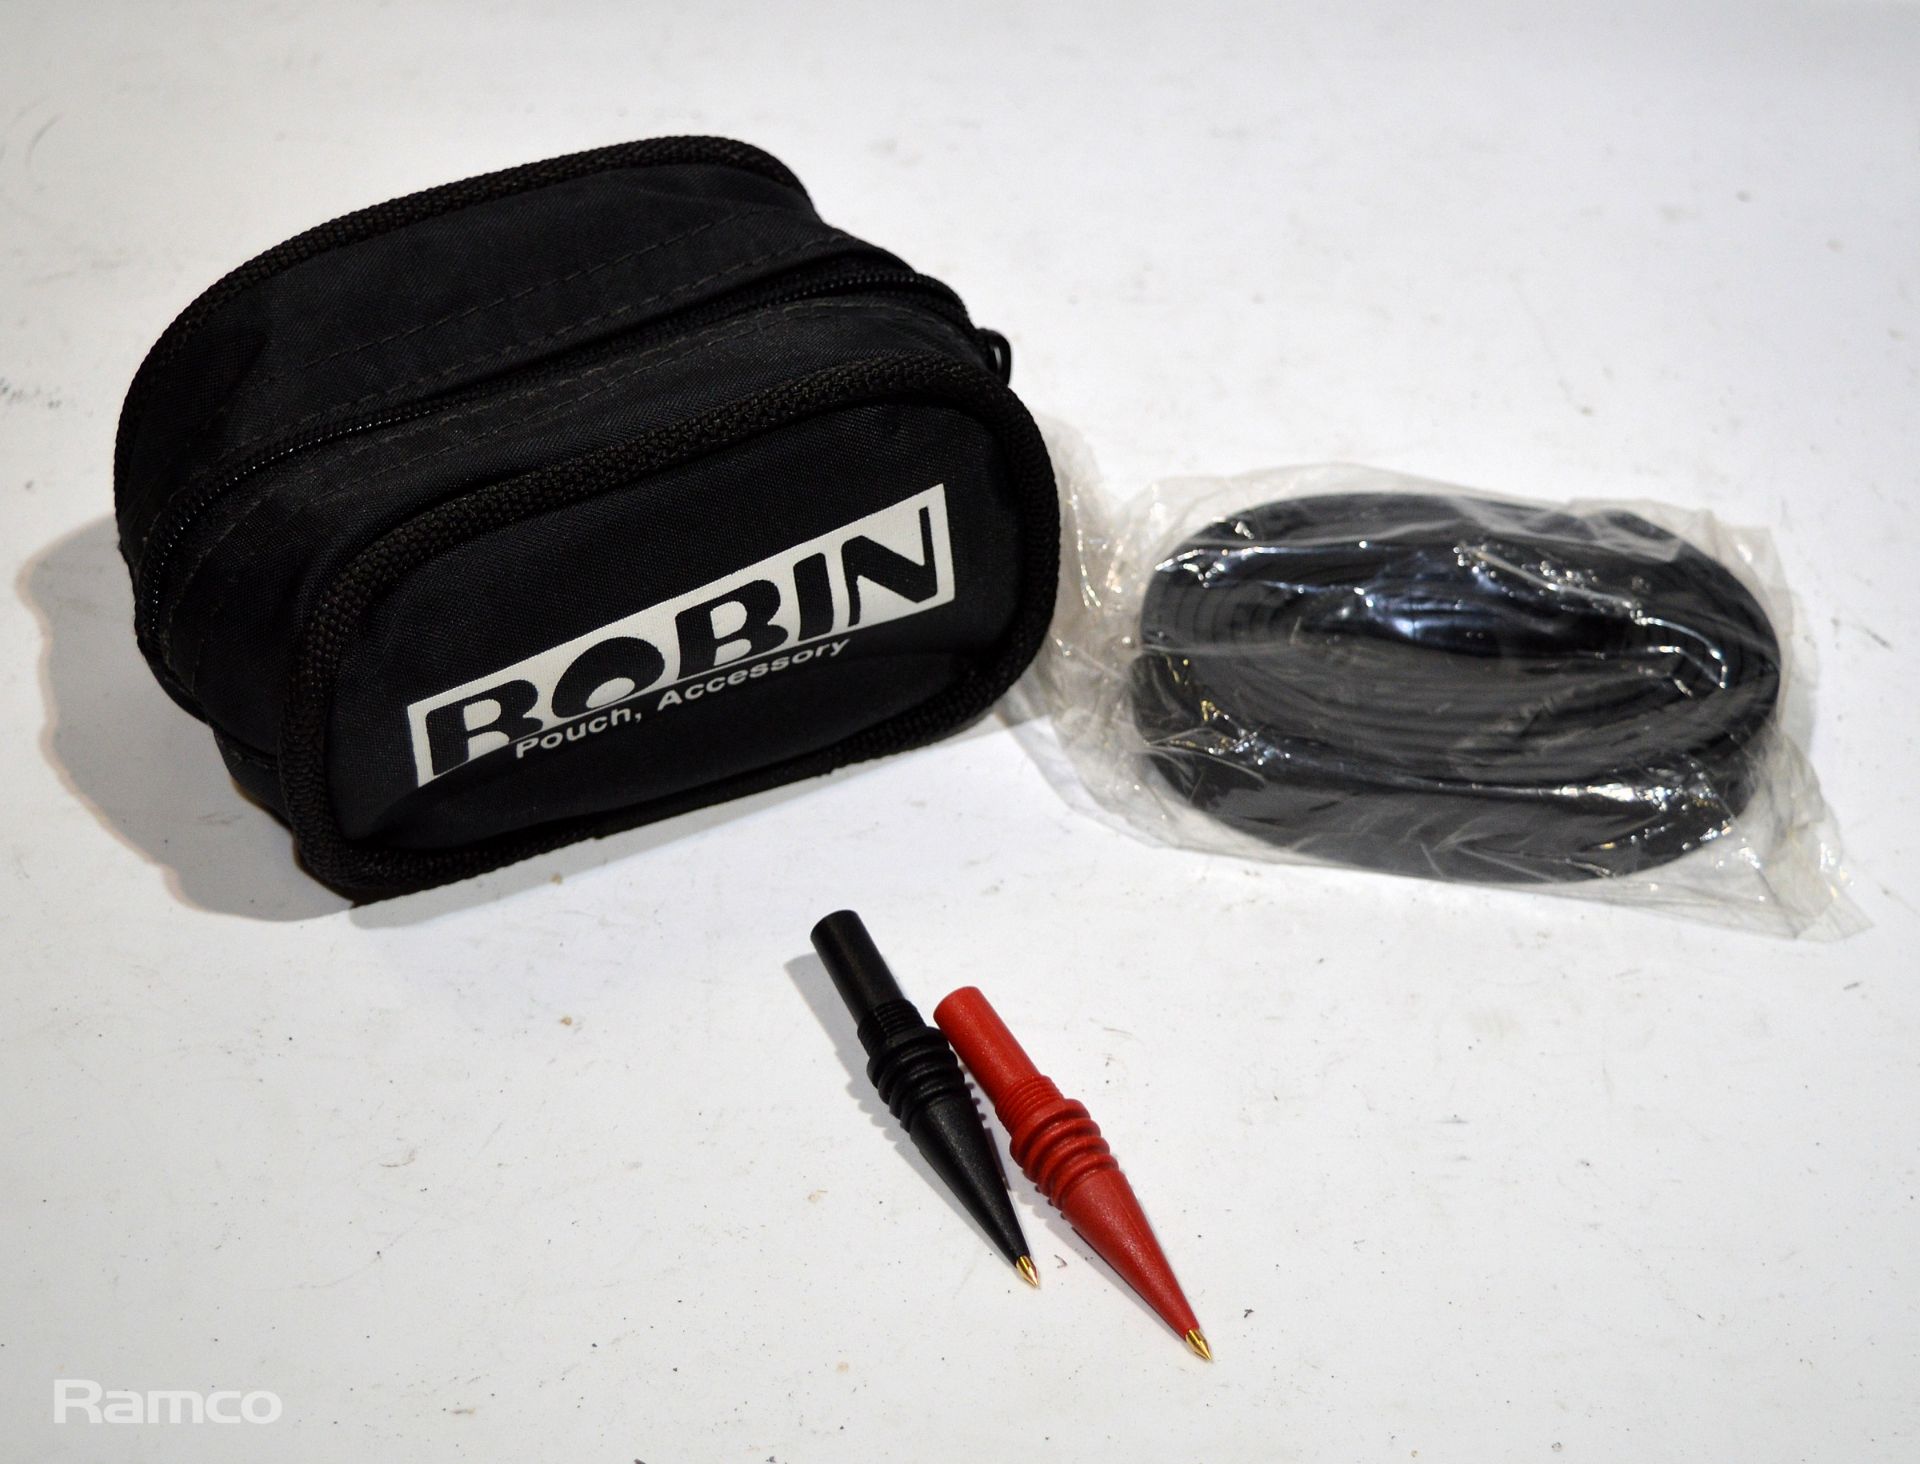 3x Robin KMP3075DL Insulation Continuity Testers in case - Image 4 of 6